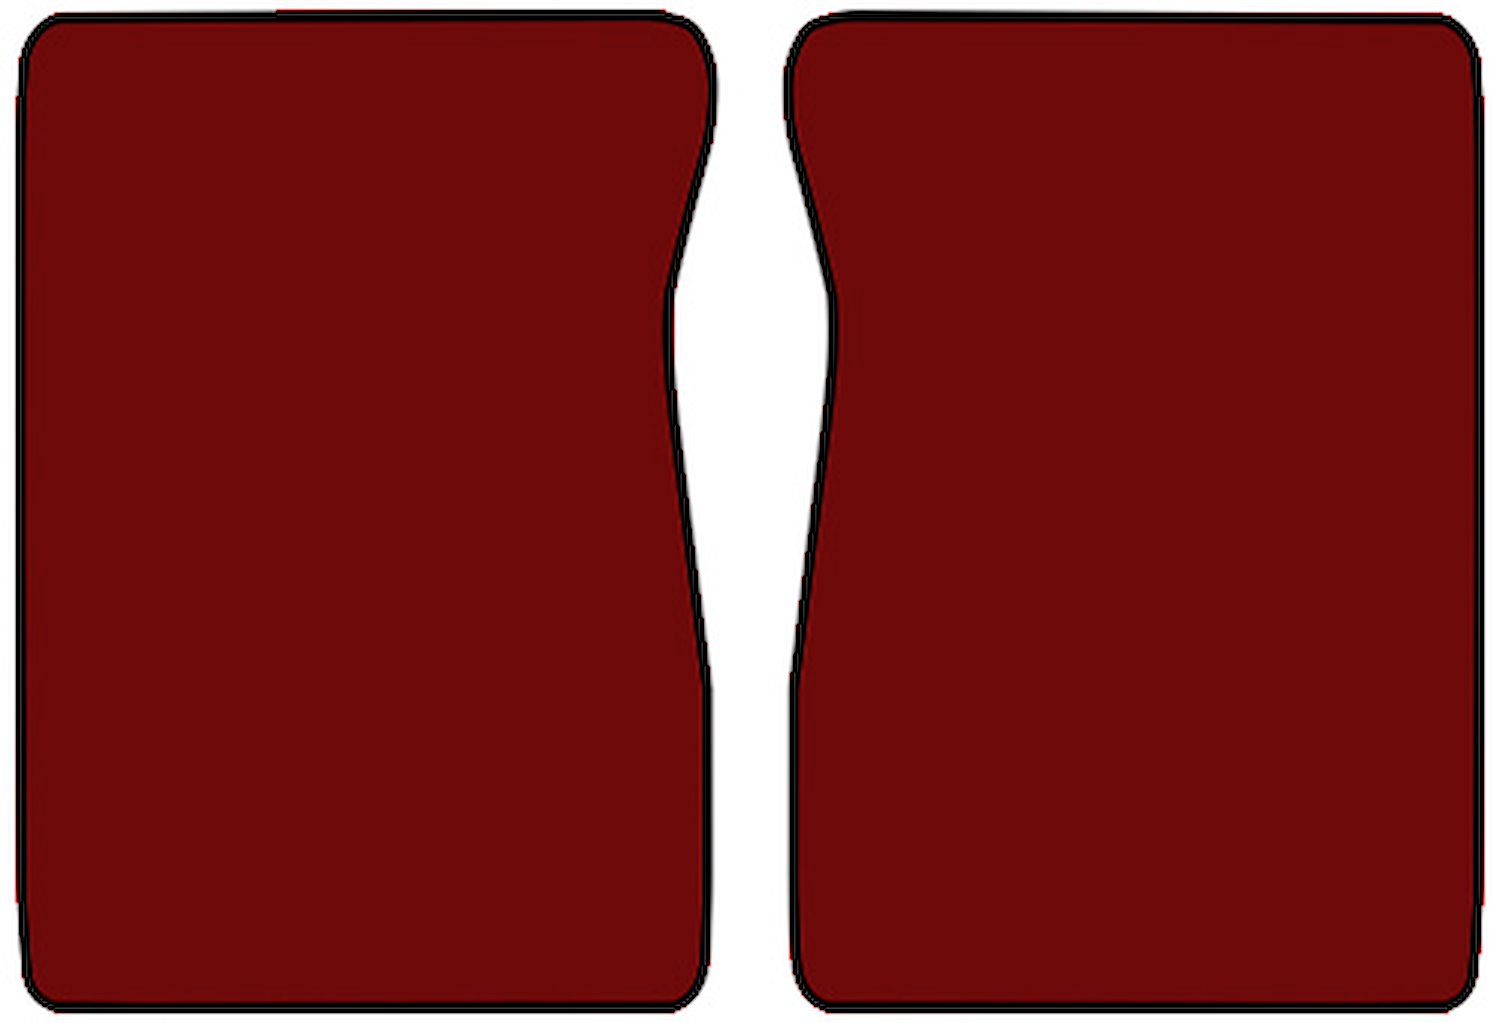 Molded Cut Pile Floor Mats for 1974 C/K Series Chevrolet and GMC Trucks [2-Piece, Automatic/4-Speed, Dark Red]